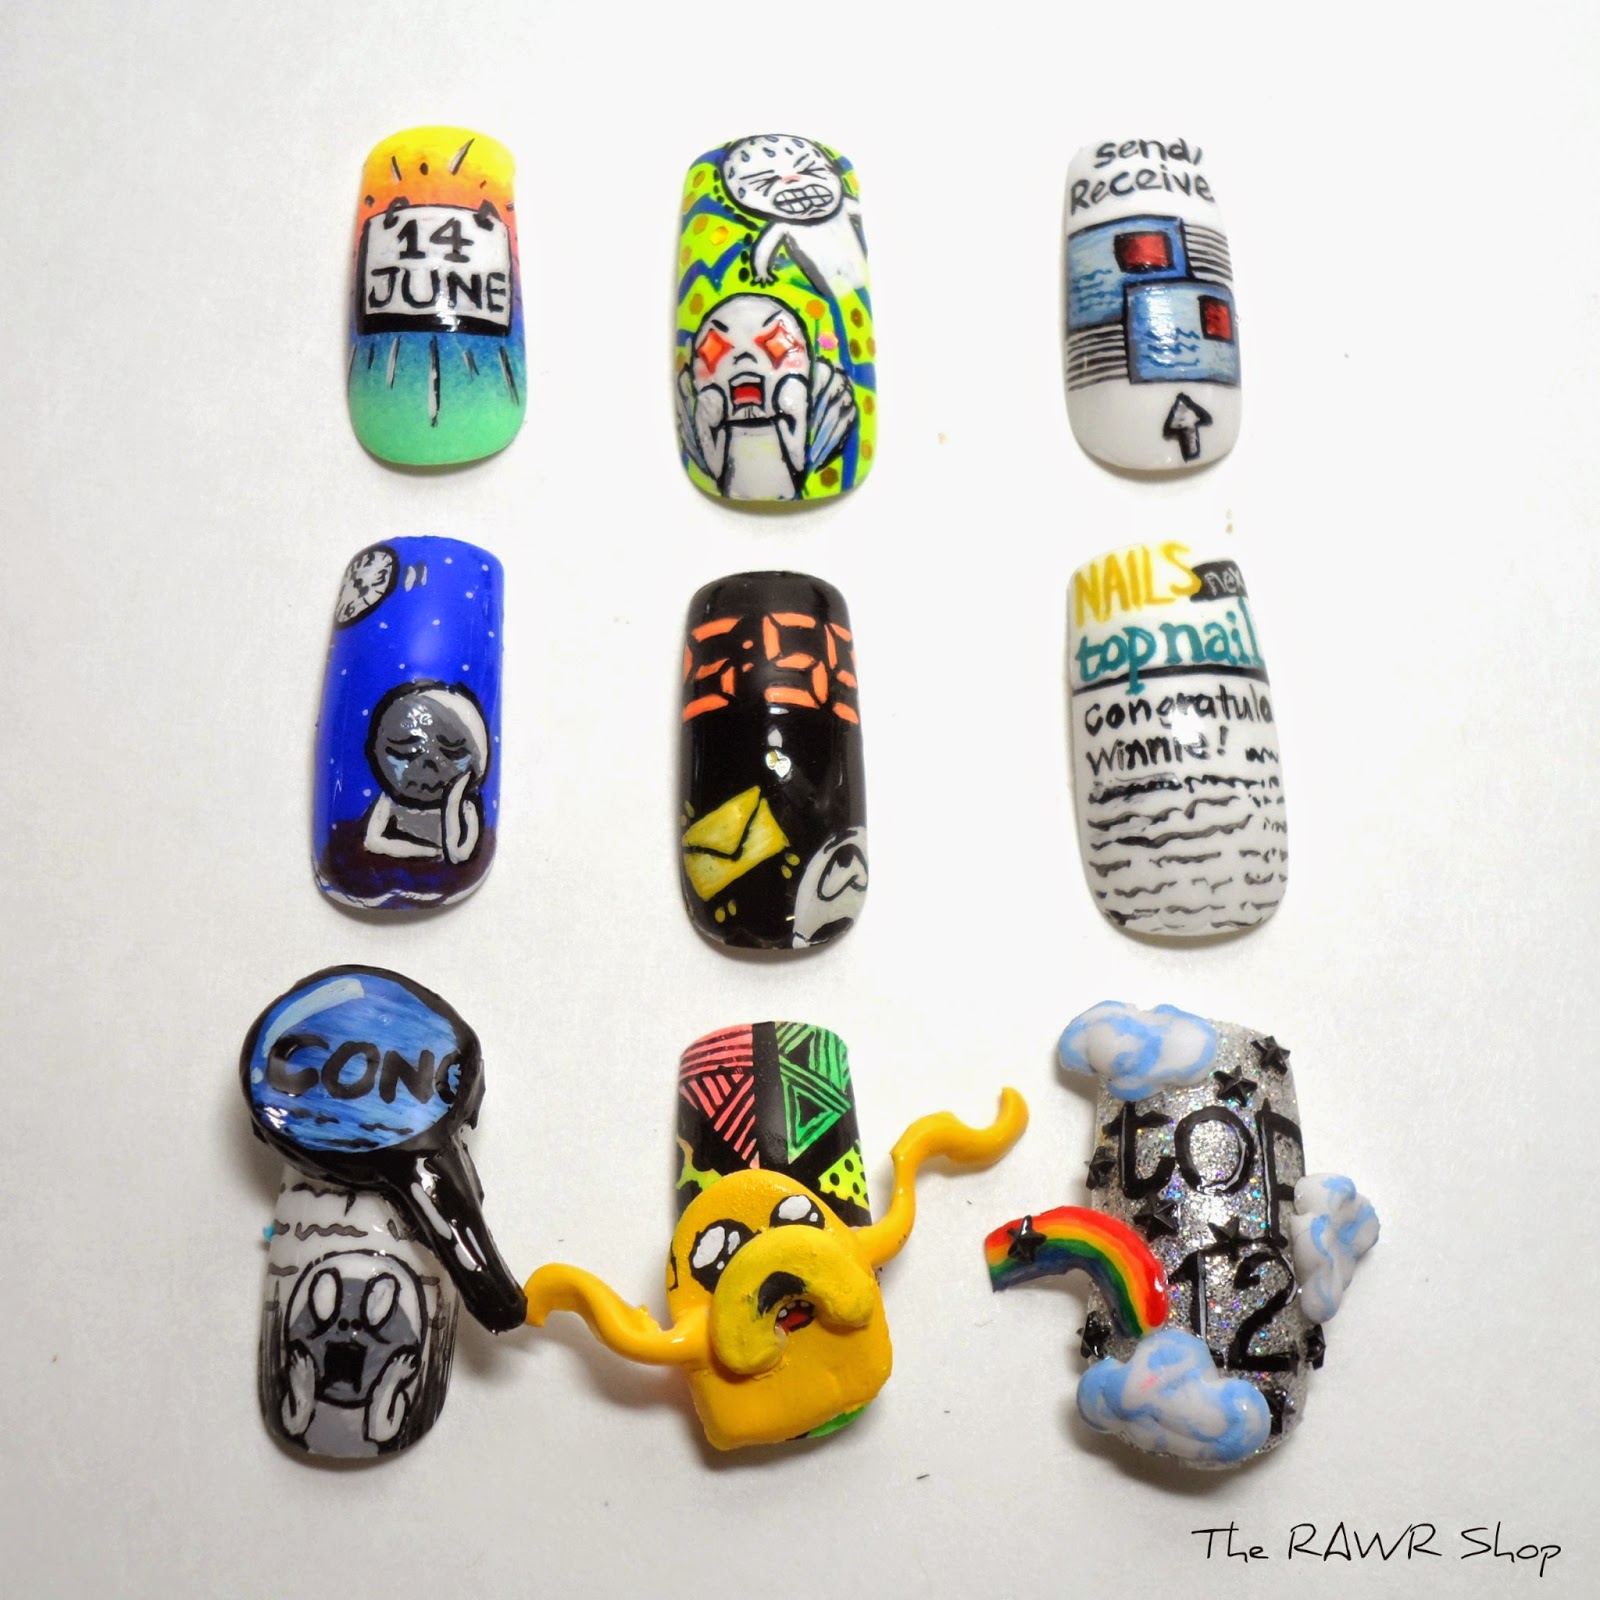 The RAWR Shop: Next Top Nail Artist Challenge- Inspired by Top 12